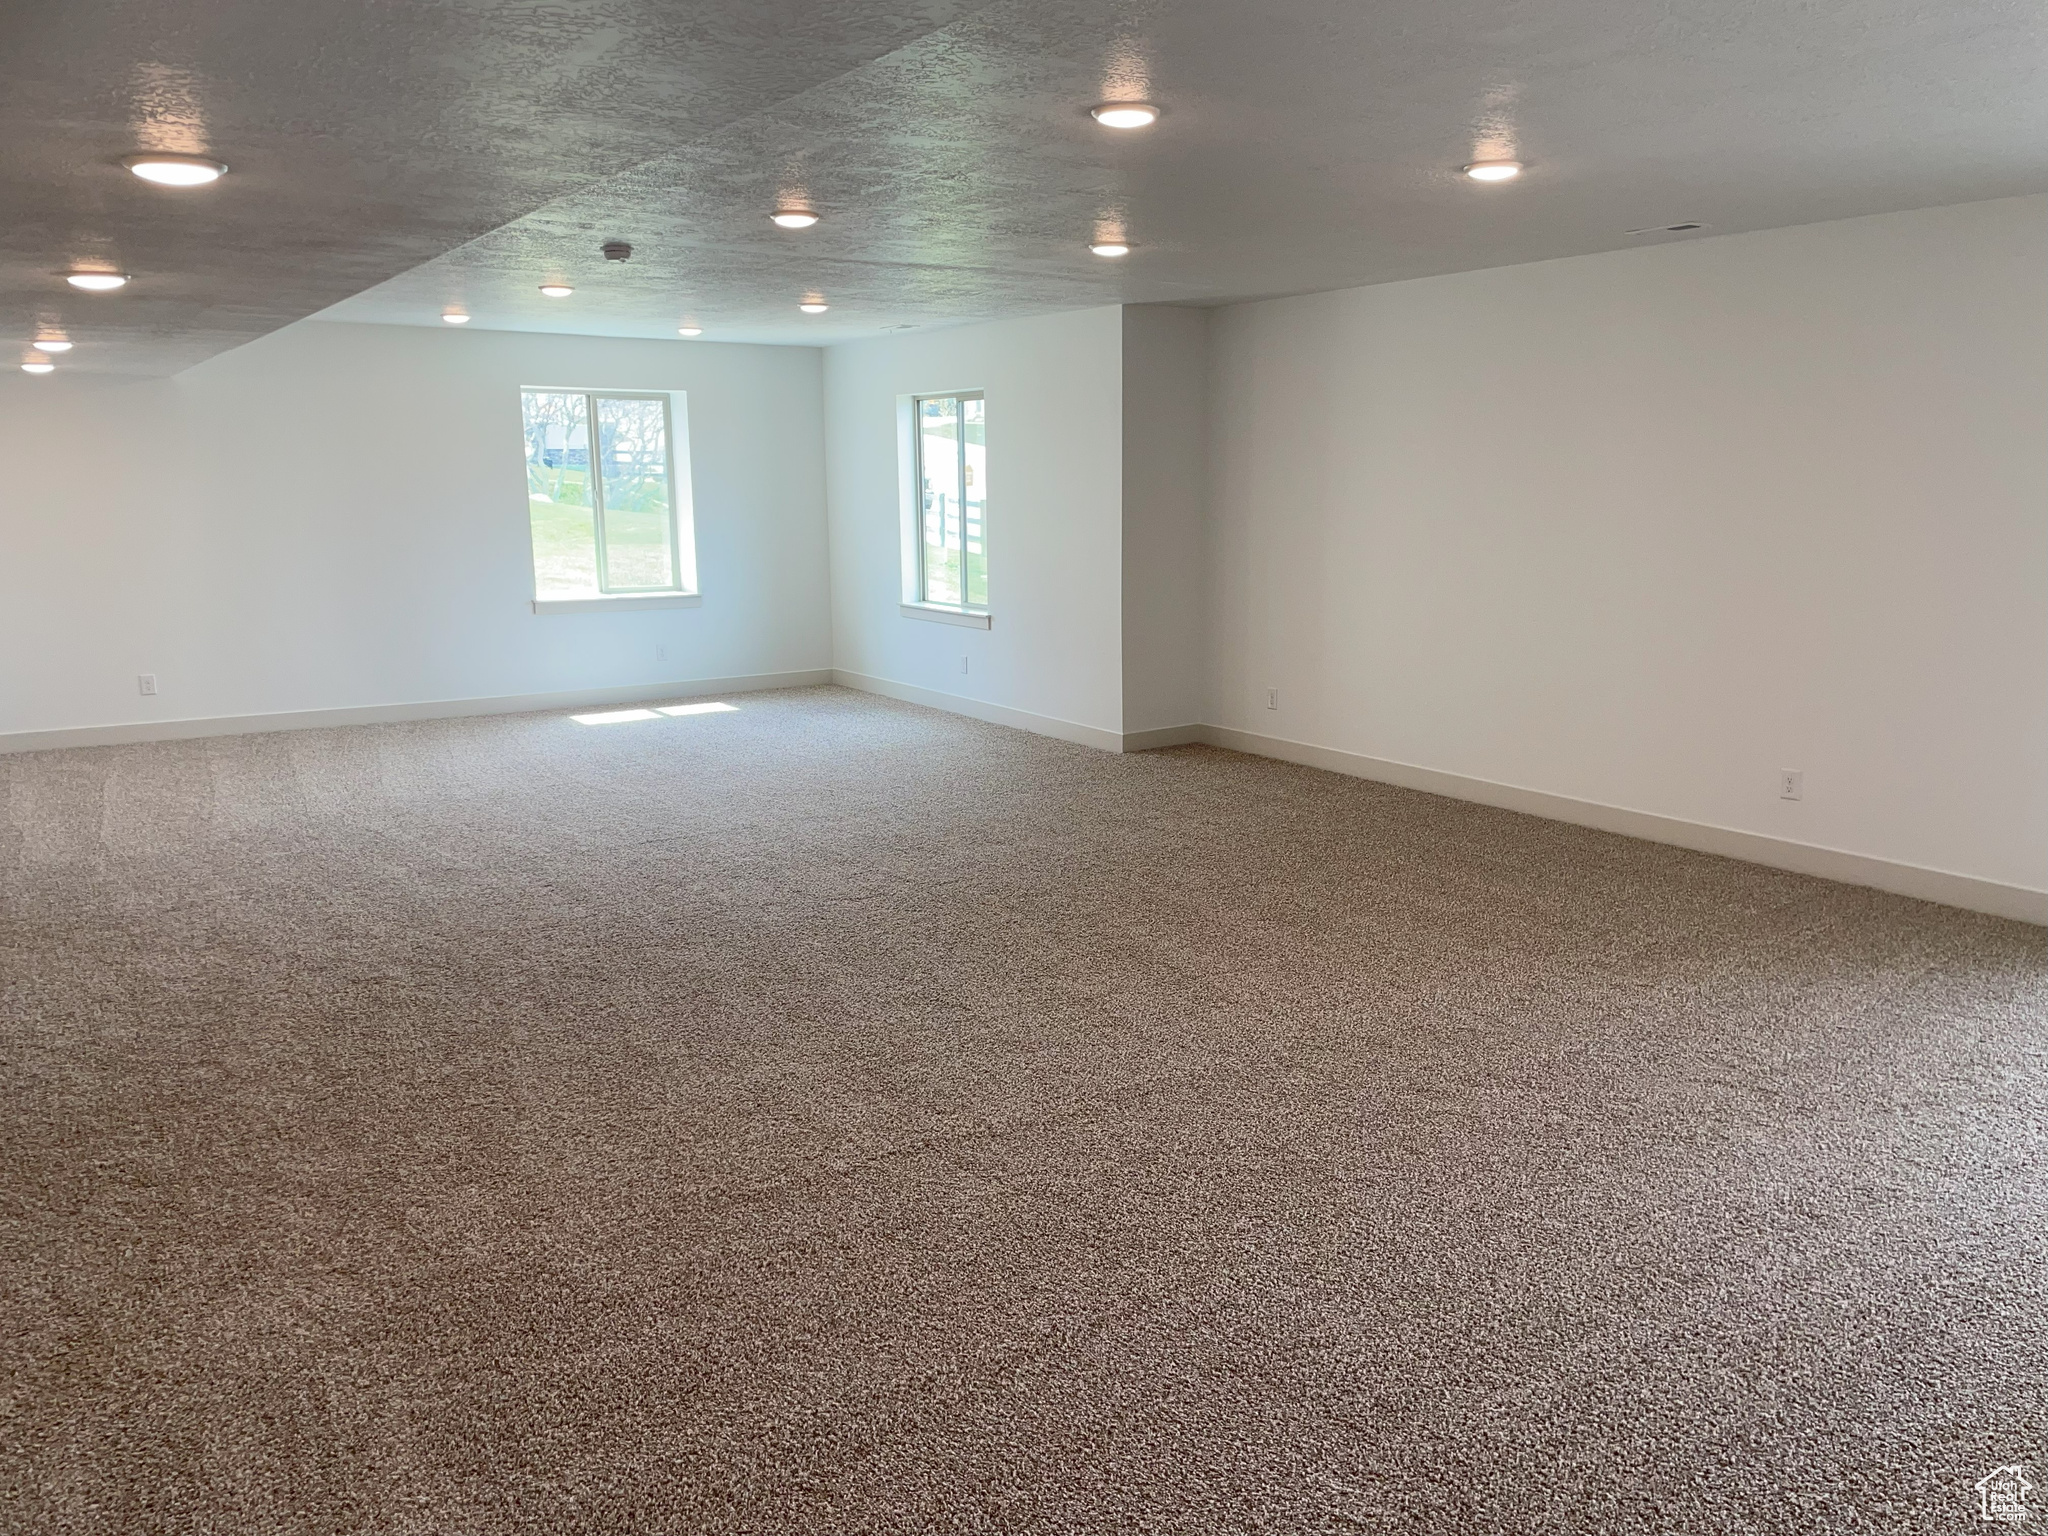 Basement Family Room with 9' Ceilings